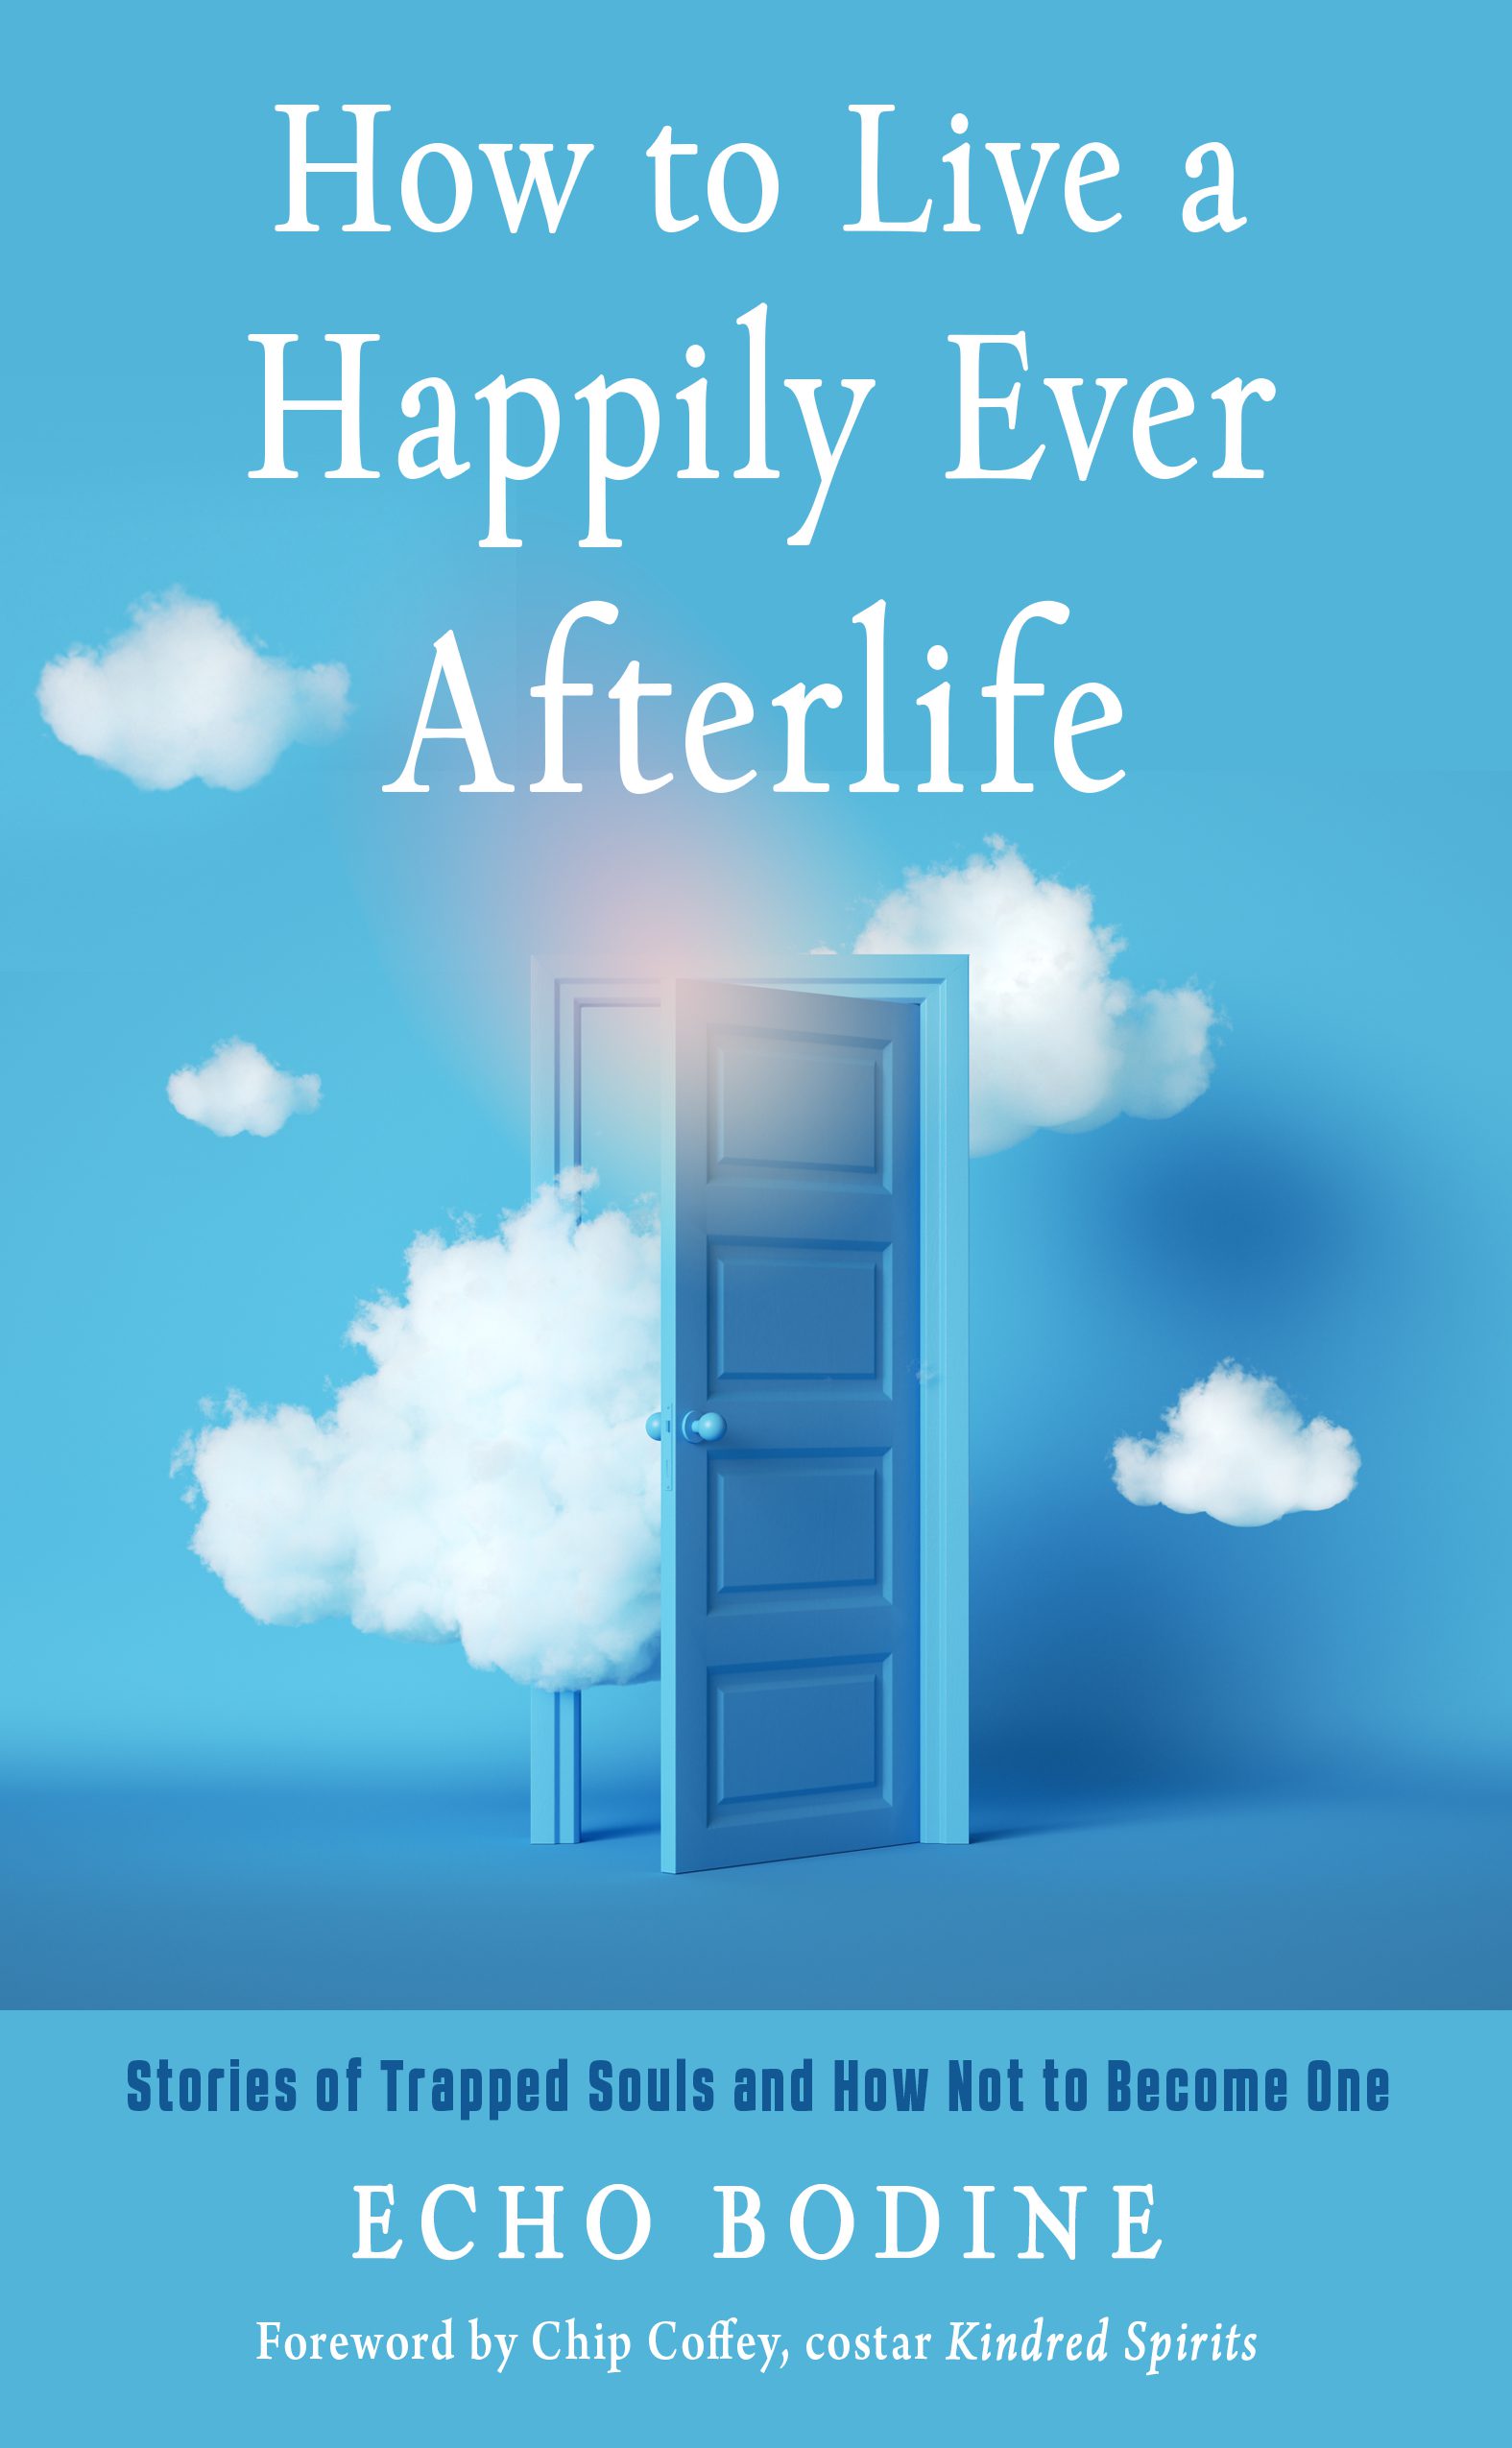 How to Live a Happily Ever Afterlife